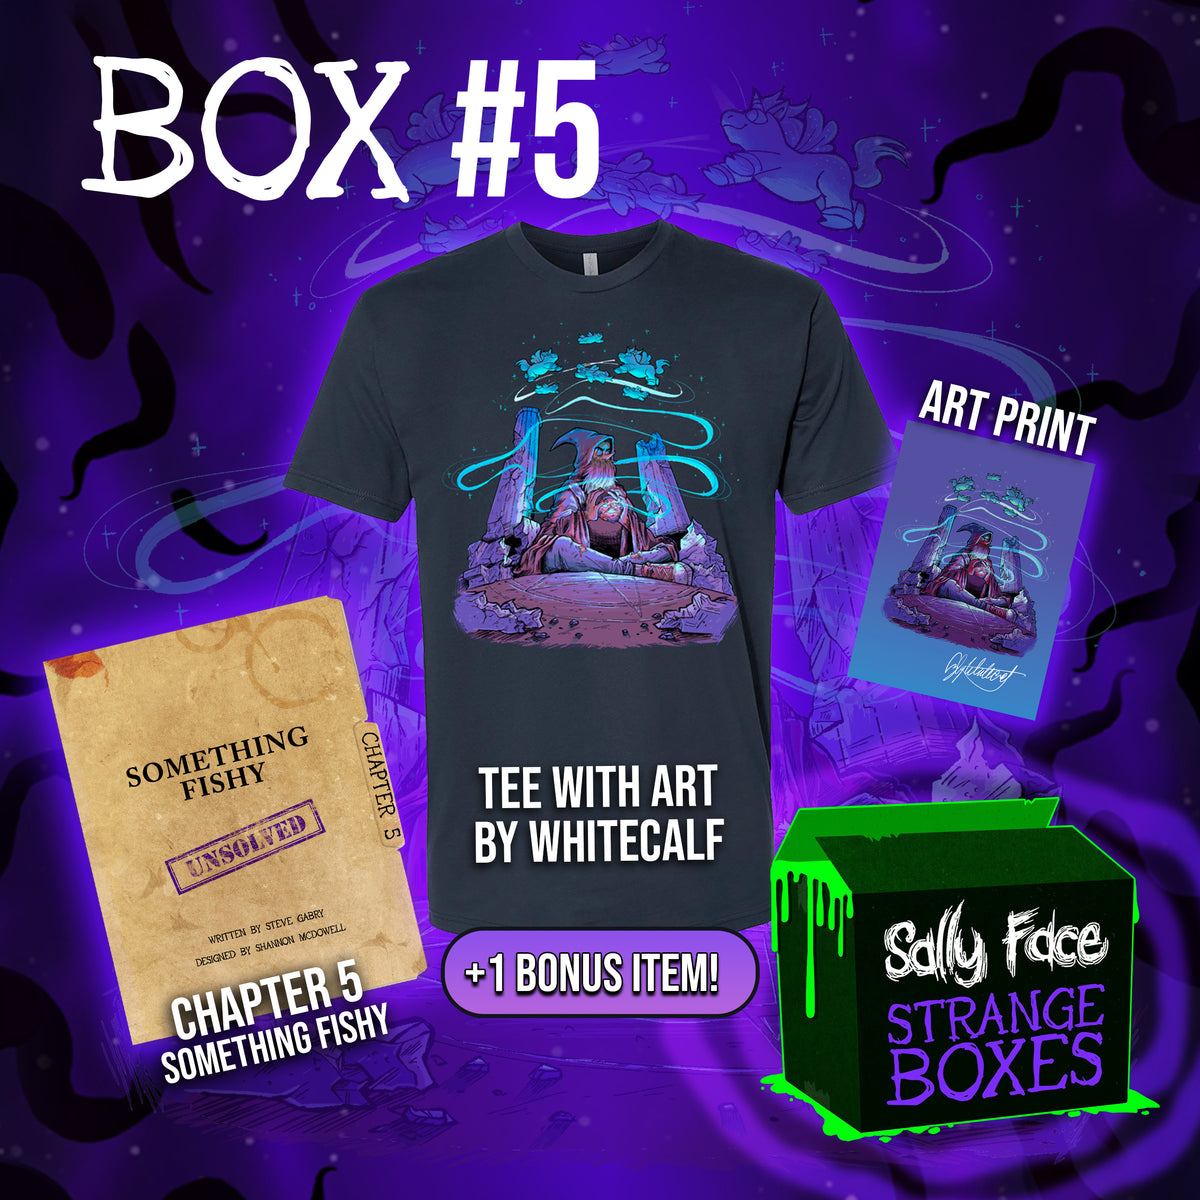 Sally Face: Strange Boxes - Annual Subscription